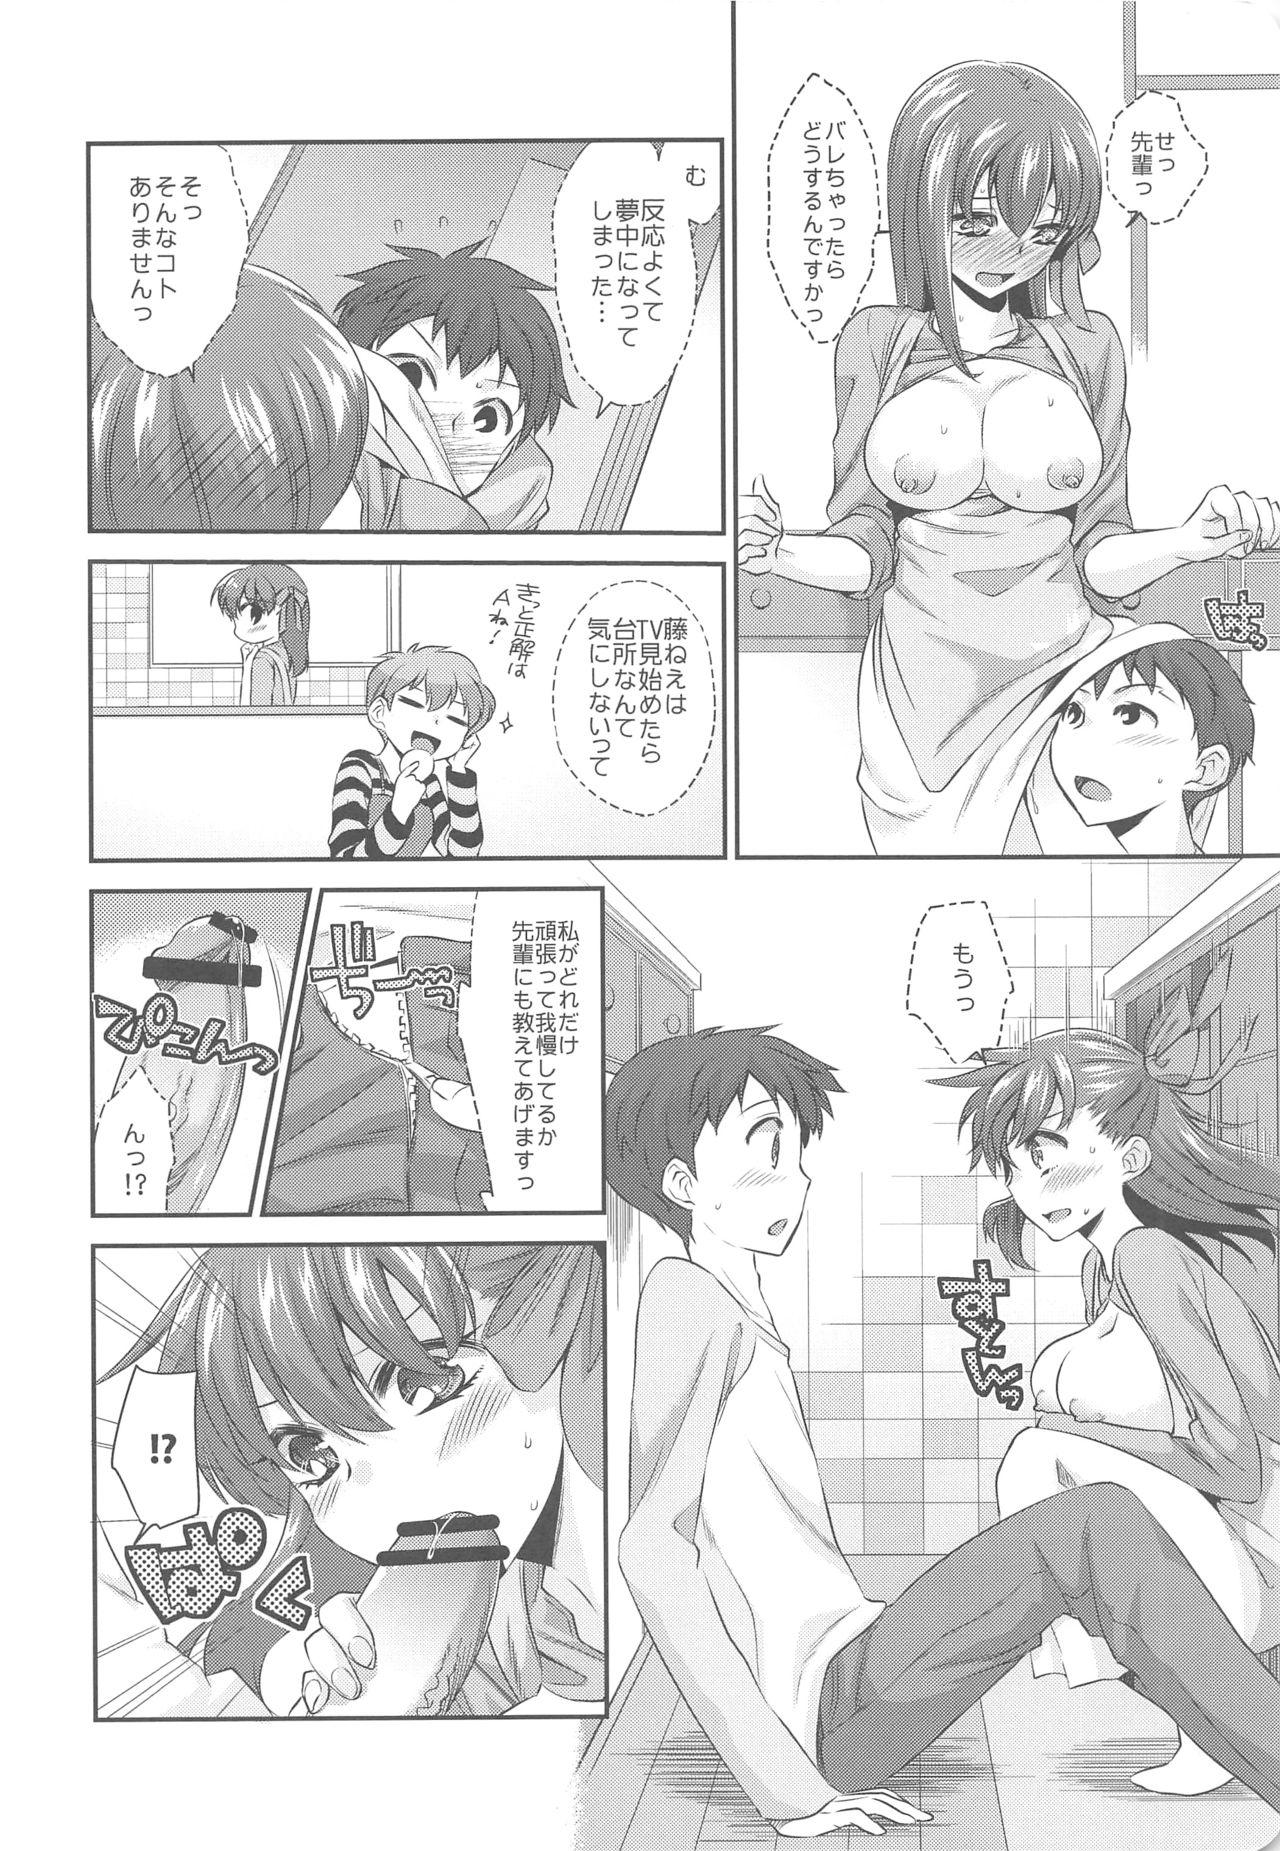 Monster Cock Kitchen H - Fate stay night Friend - Page 6